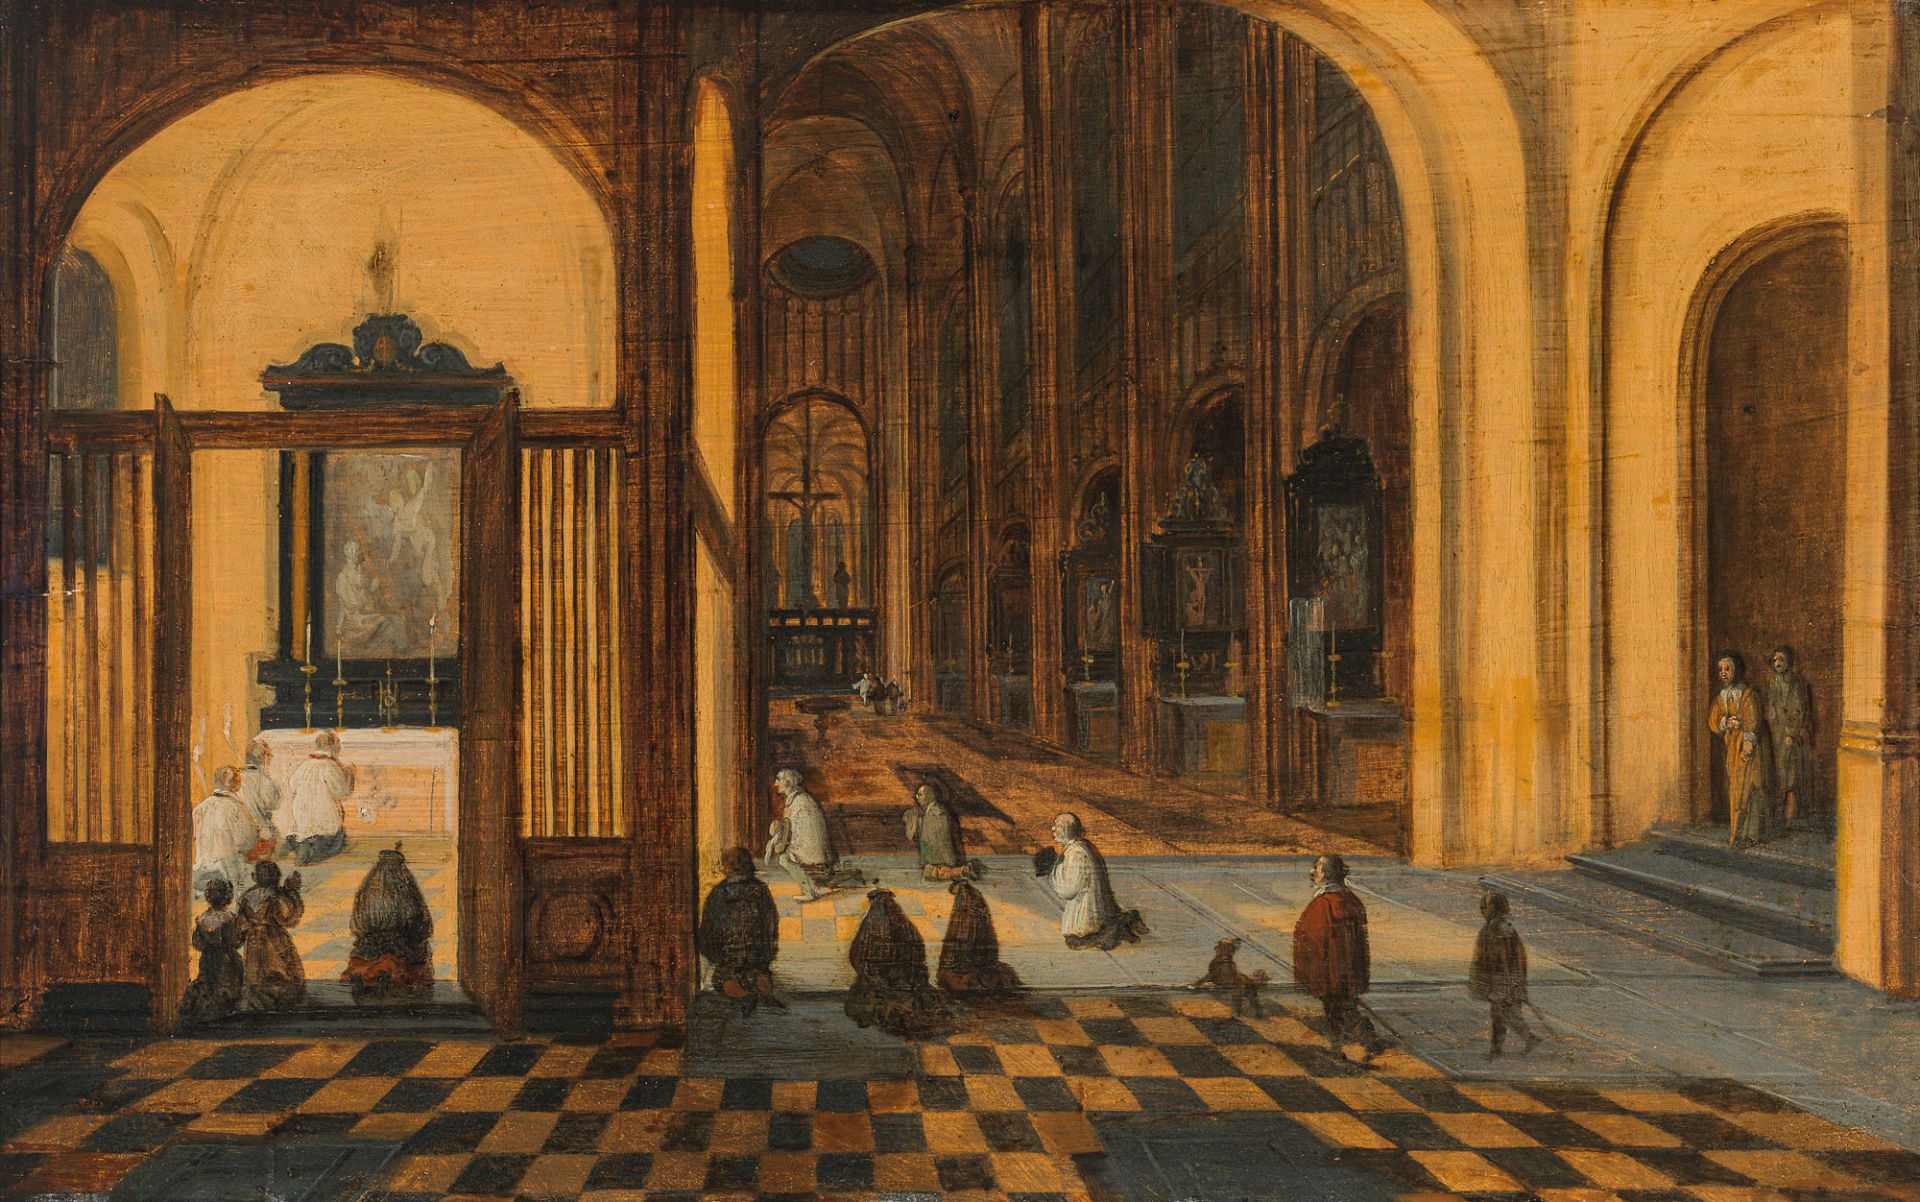 Studio of Pieter Neeffs the Elder, Interior of a Gothic church with service in a side chapel